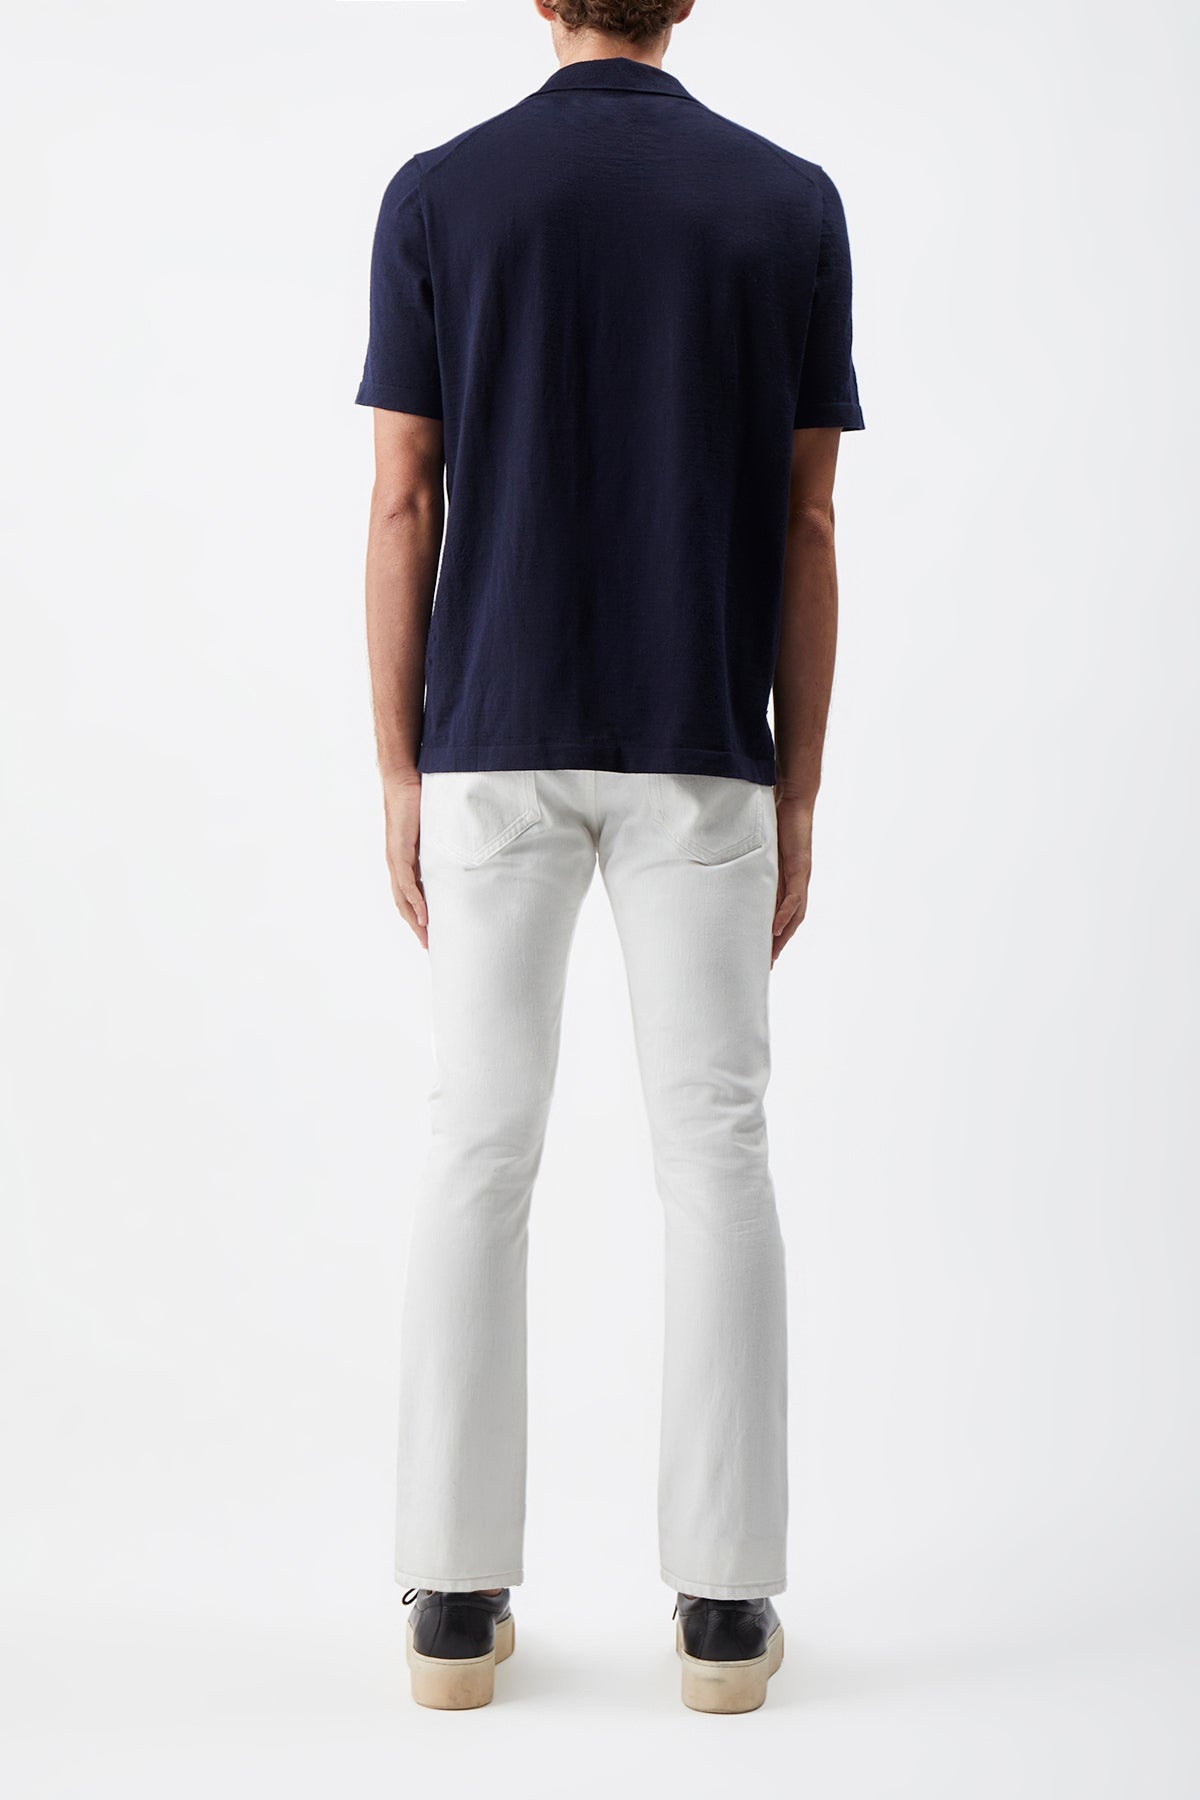 Stendhal Knit Short Sleeve Polo in Navy Cashmere - 4